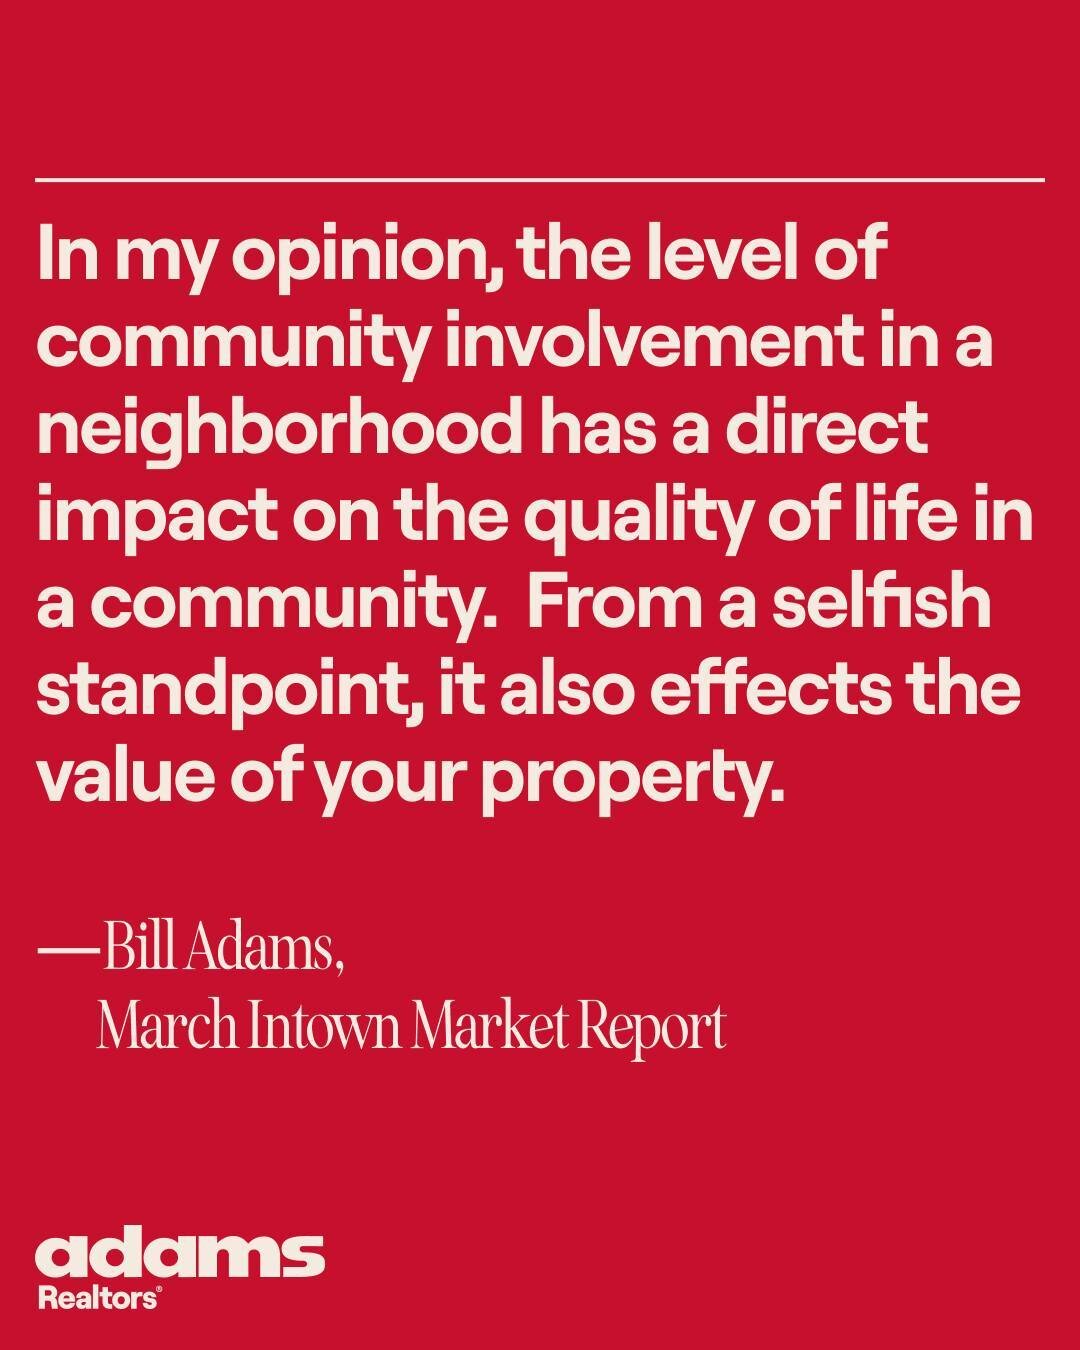 In this month's Market Report, @billadamsbroker focuses on the Intown Atlanta neighborhoods that make up &quot;the cradle of neighborhood activism&quot; in Atlanta. Read more at the link in our bio! ❤️